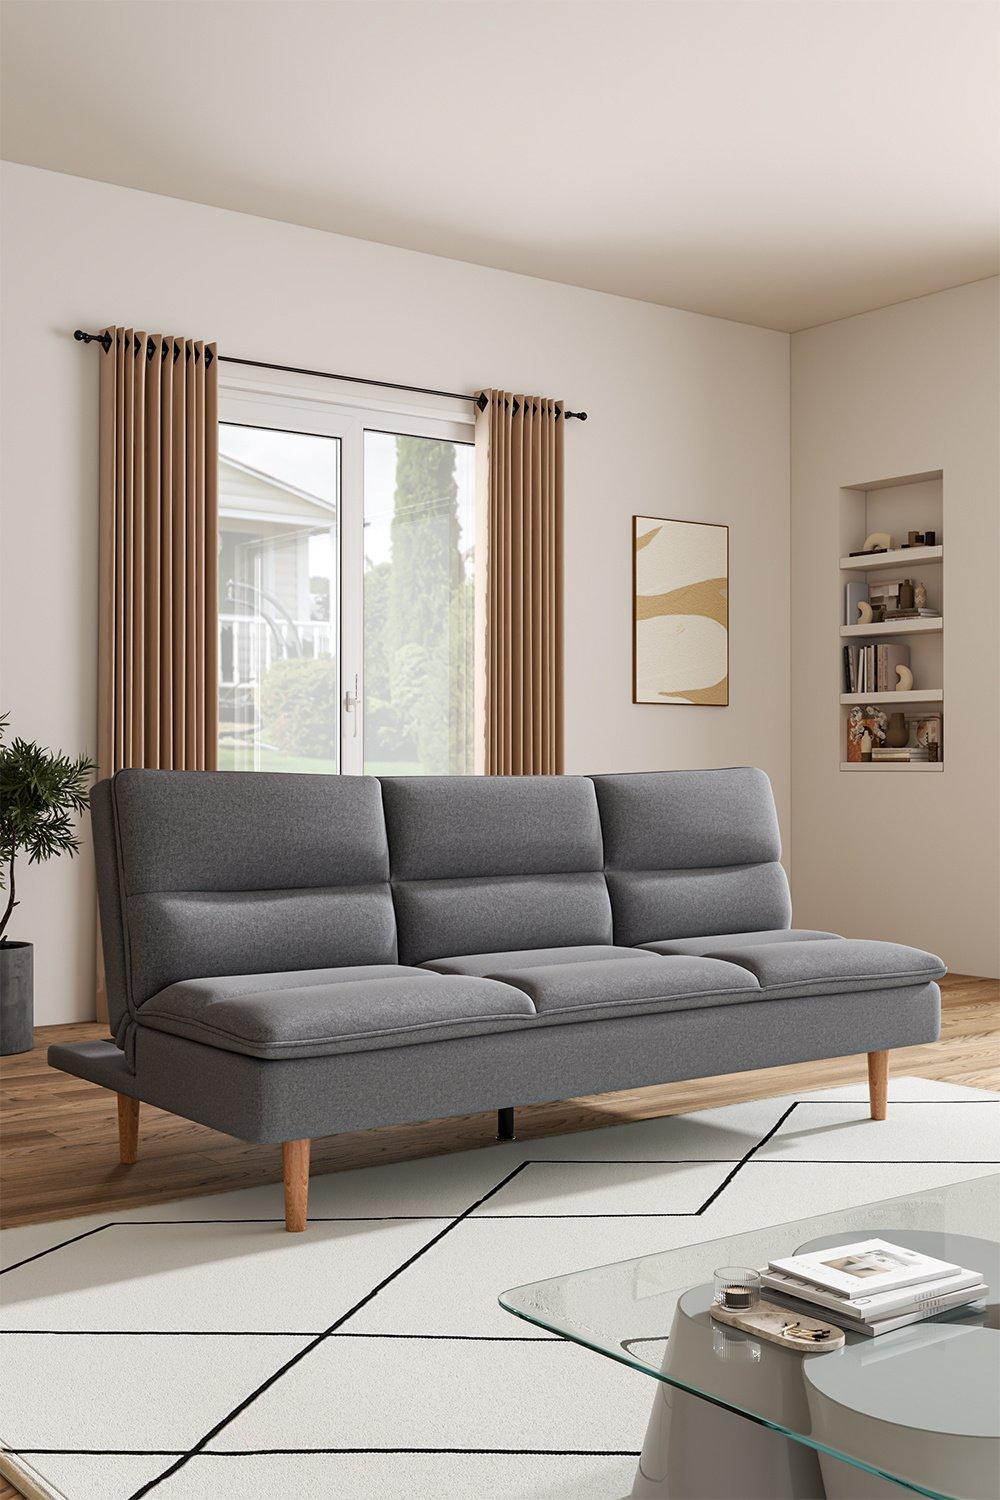 Grey Pull Out Sleeper Sofa Bed